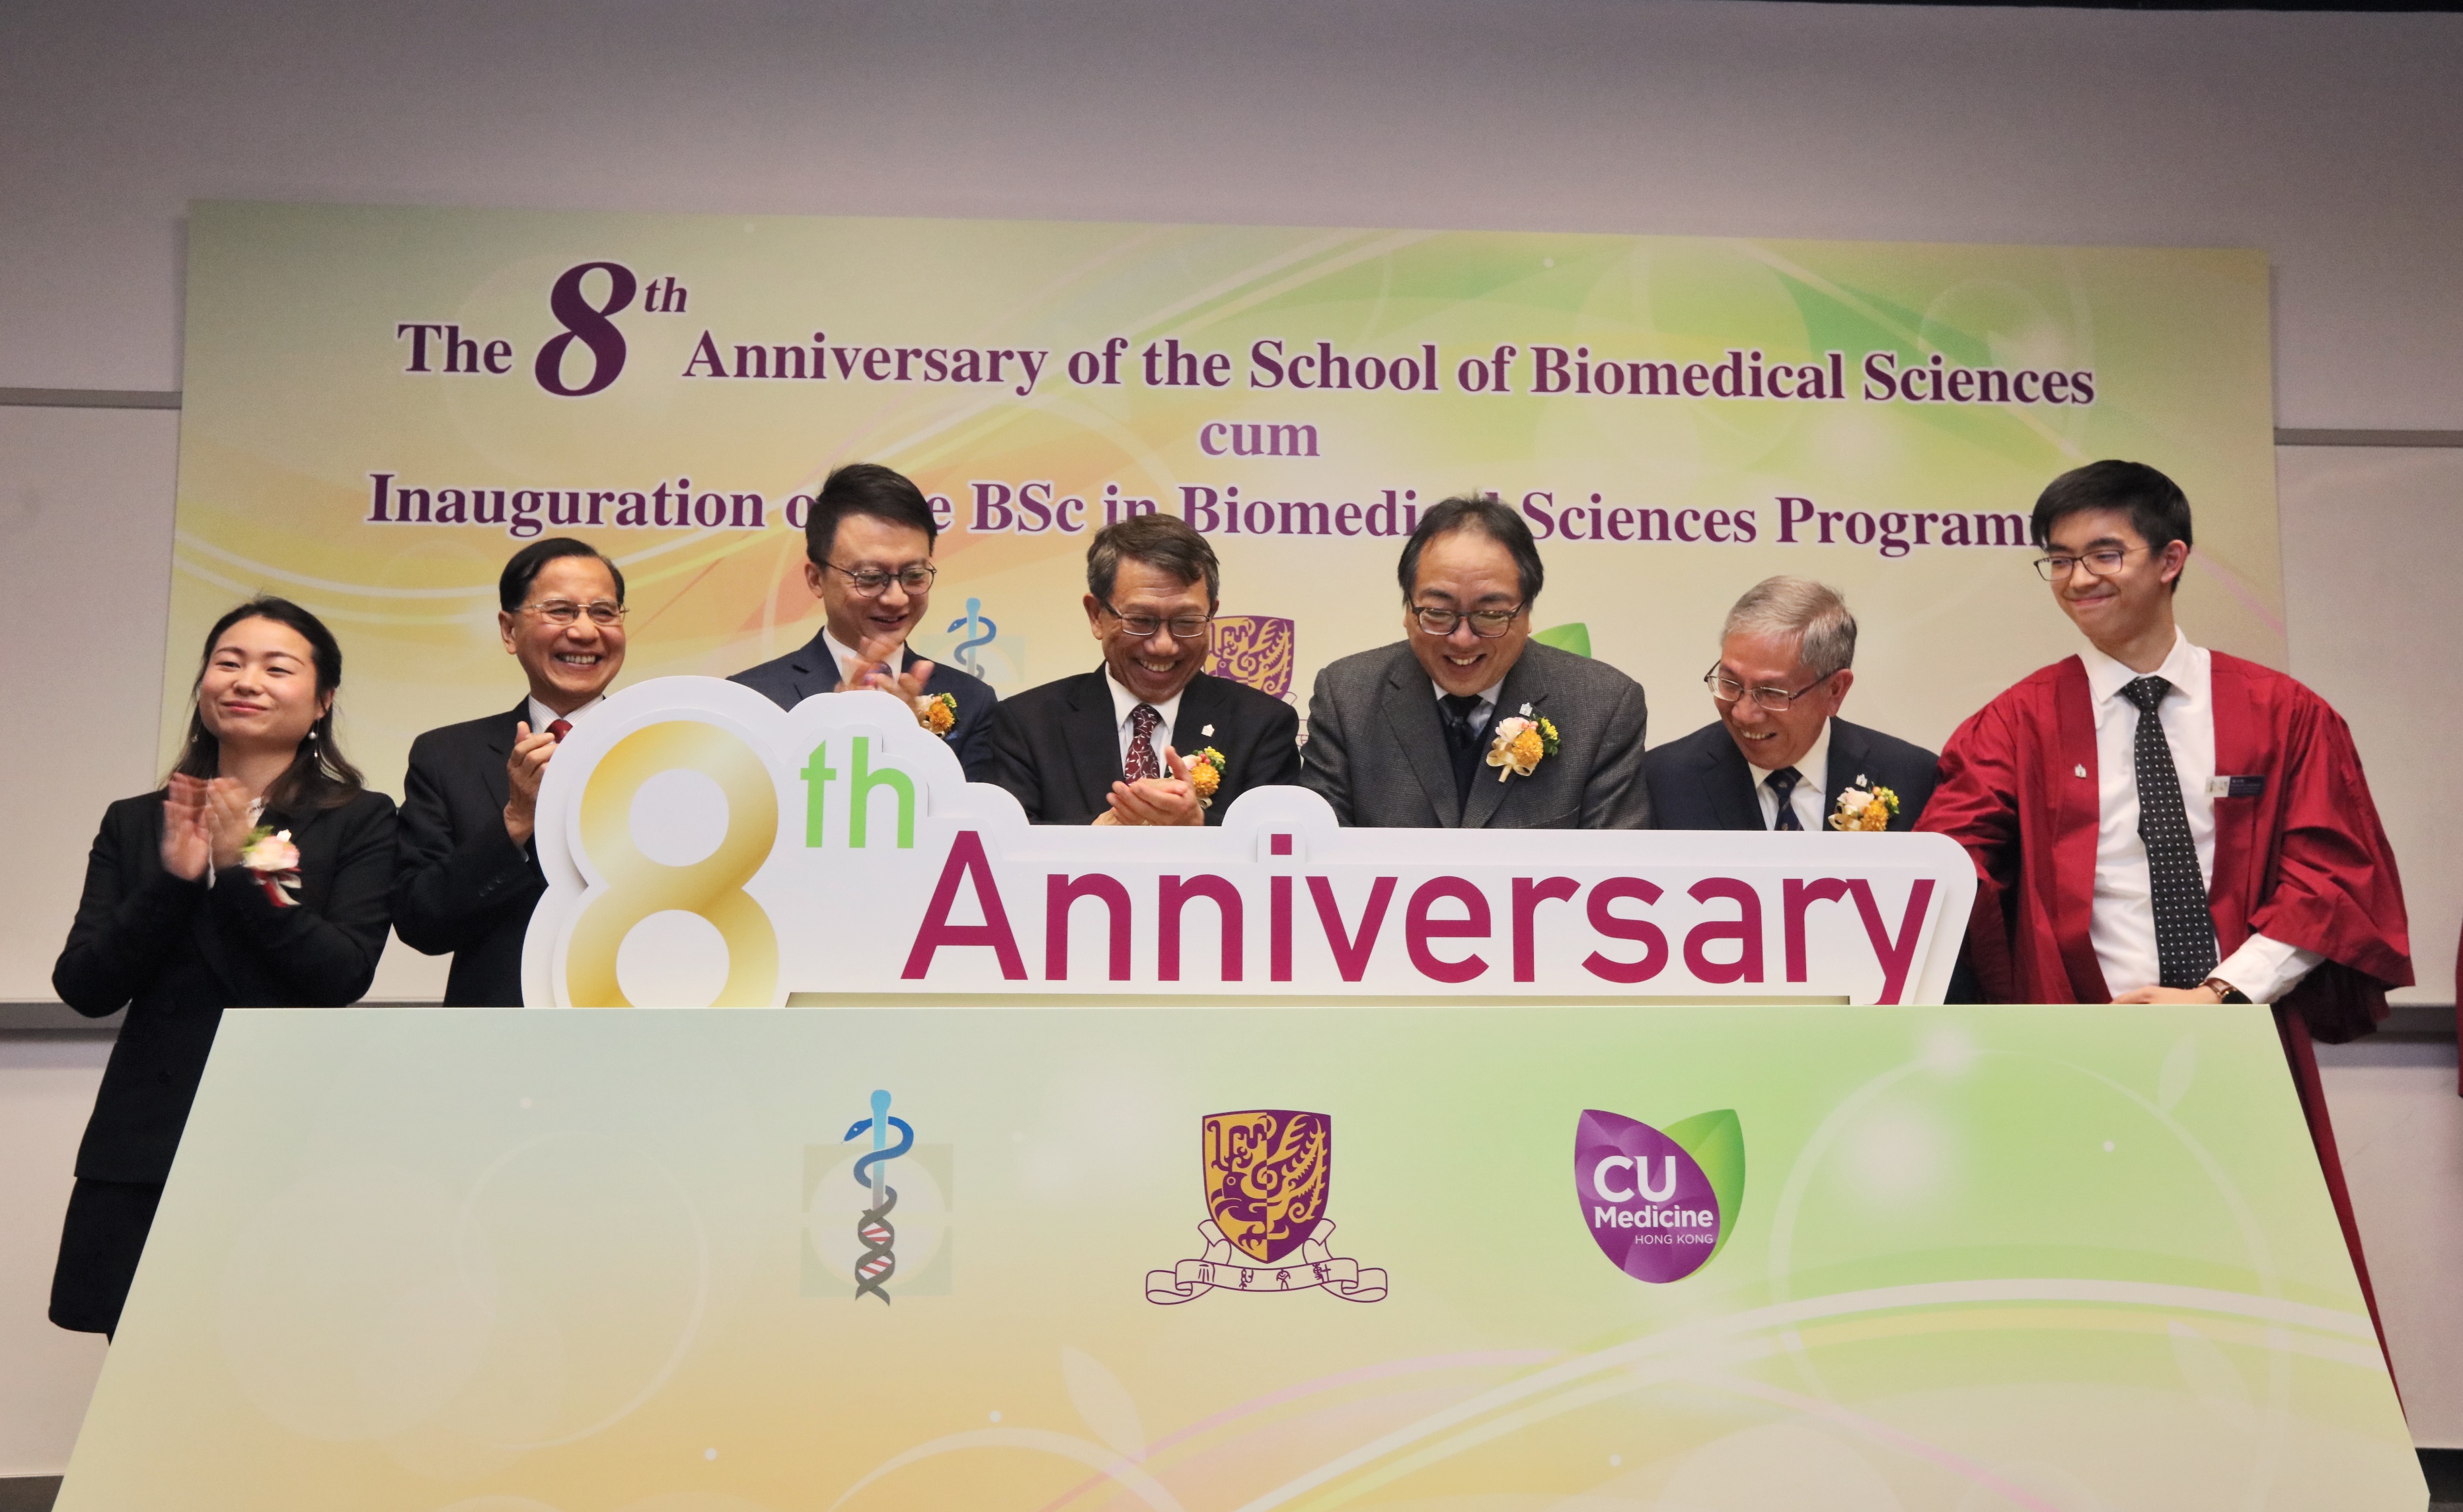 The School of Biomedical Sciences at CUHK celebrates its 8th anniversary. Officiating guests include Prof. Lap-Chee TSUI, Founding President of The Academy of Sciences of Hong Kong (3rd from right); Prof. Rocky S. TUAN, Vice-Chancellor and President of CUHK (centre); Prof. Francis CHAN, Dean of the Faculty of Medicine at CUHK (3rd from left); and Prof. Wai-Yee CHAN, Professor of Biomedical Sciences and Director of the School of Biomedical Sciences at CUHK (2nd from right). 